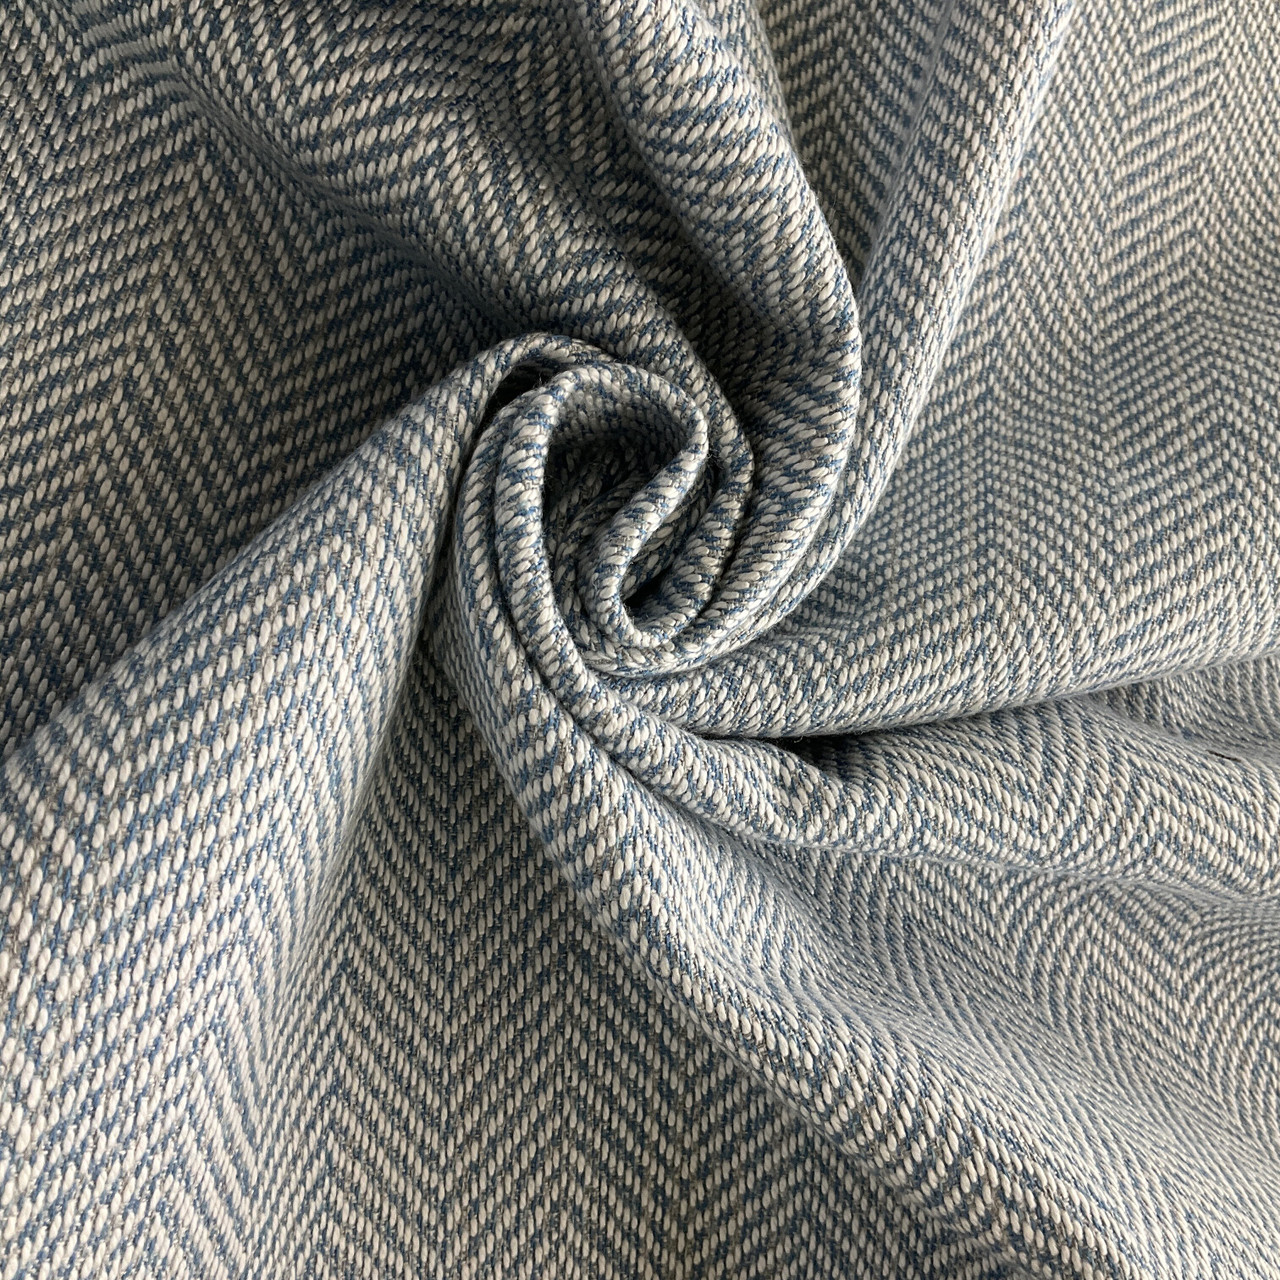 Browse our Sunbrella Upholstery fabrics